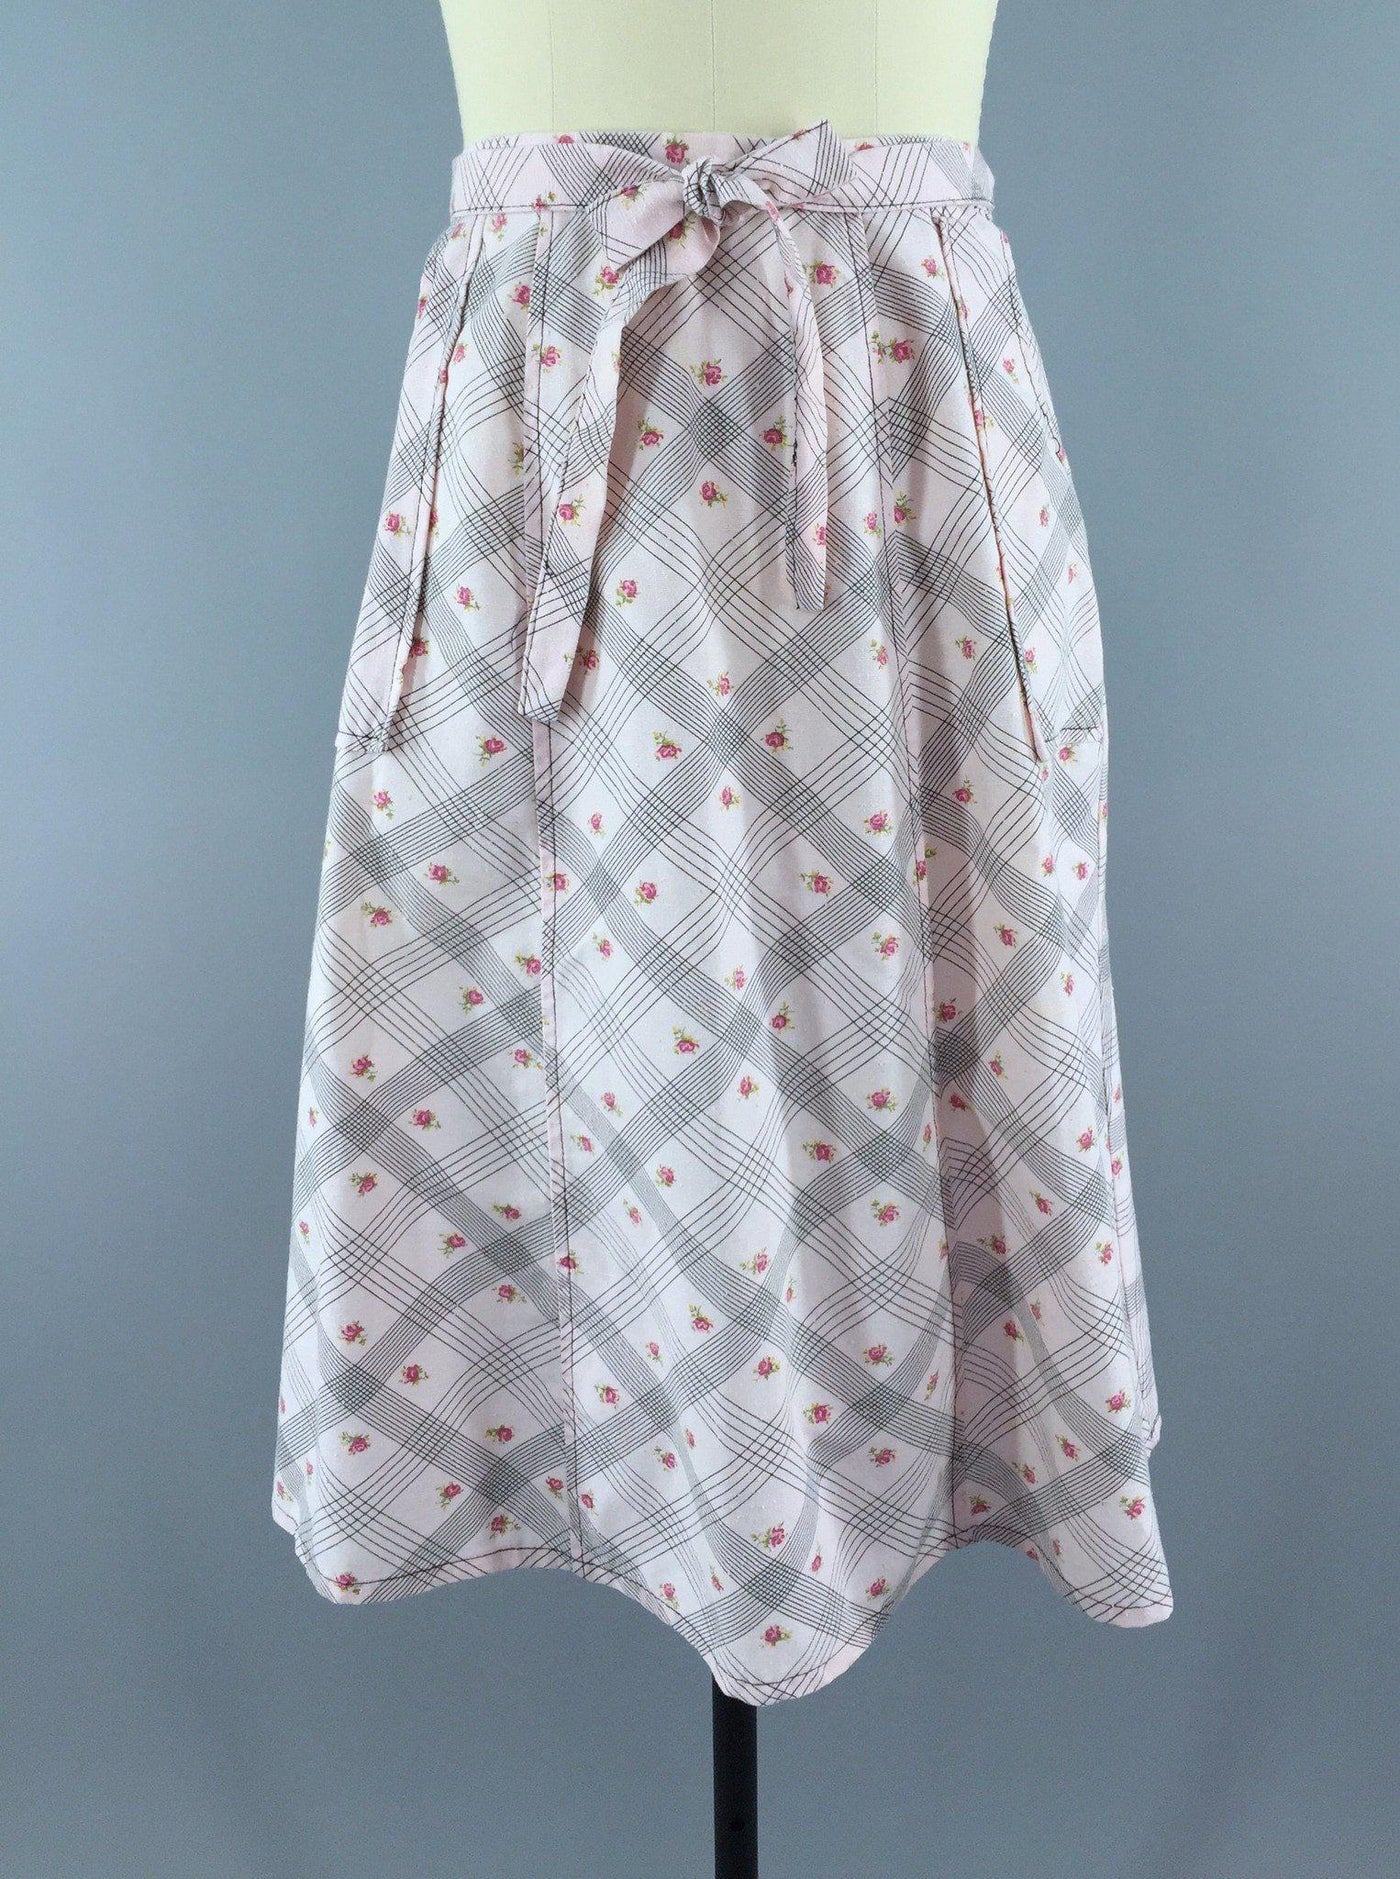 Vintage 1970s Wrap Skirt with Pink Rose Floral Print - ThisBlueBird